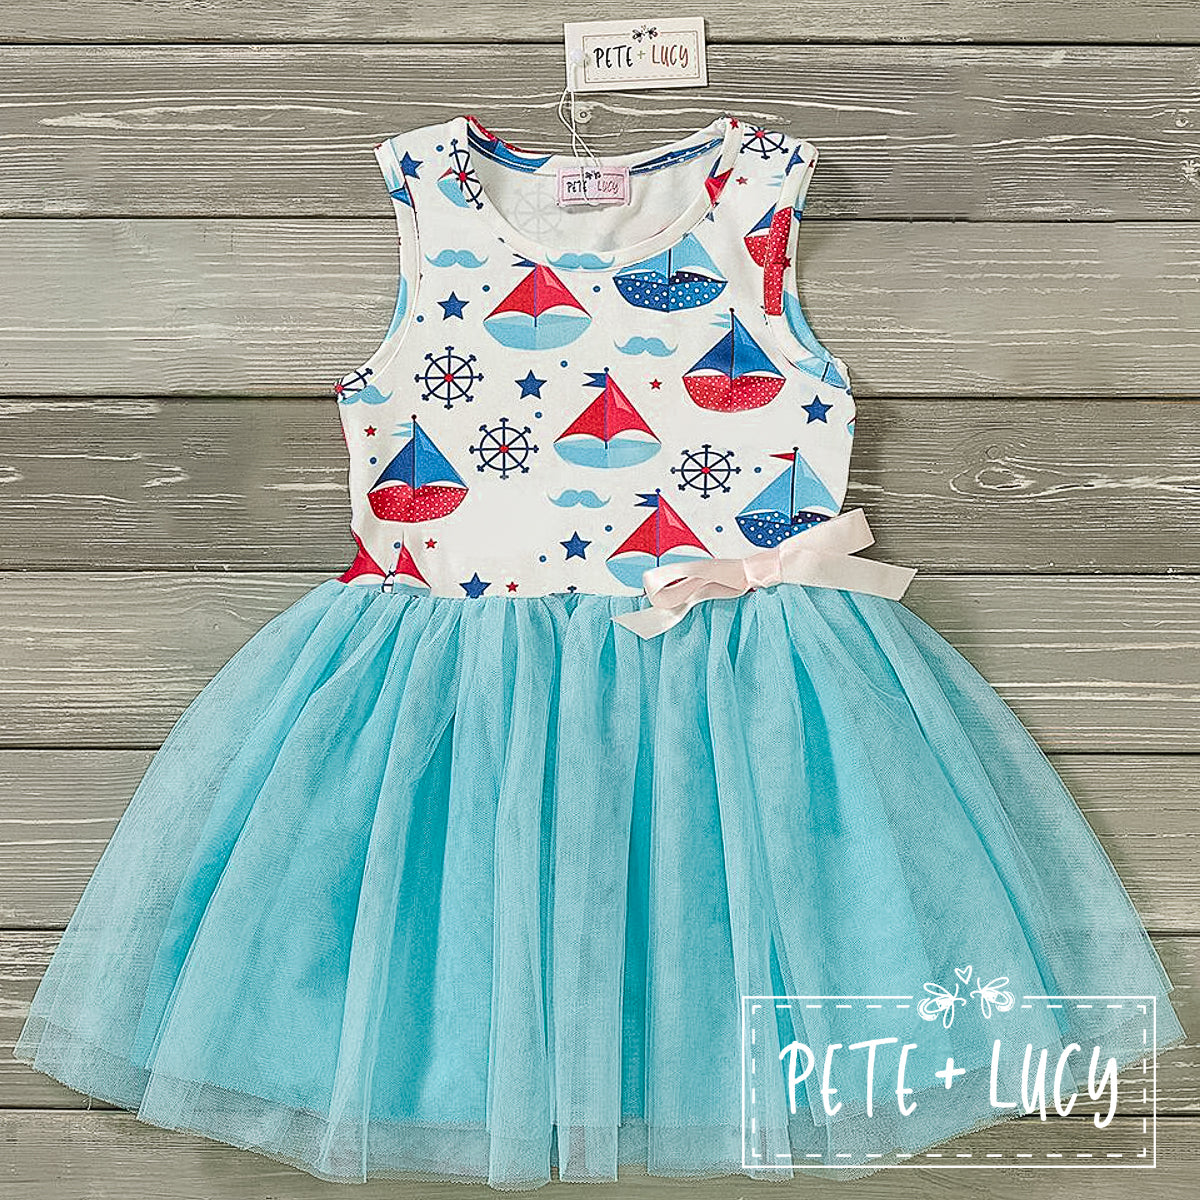 Come Sail With Me: Tulle Dress